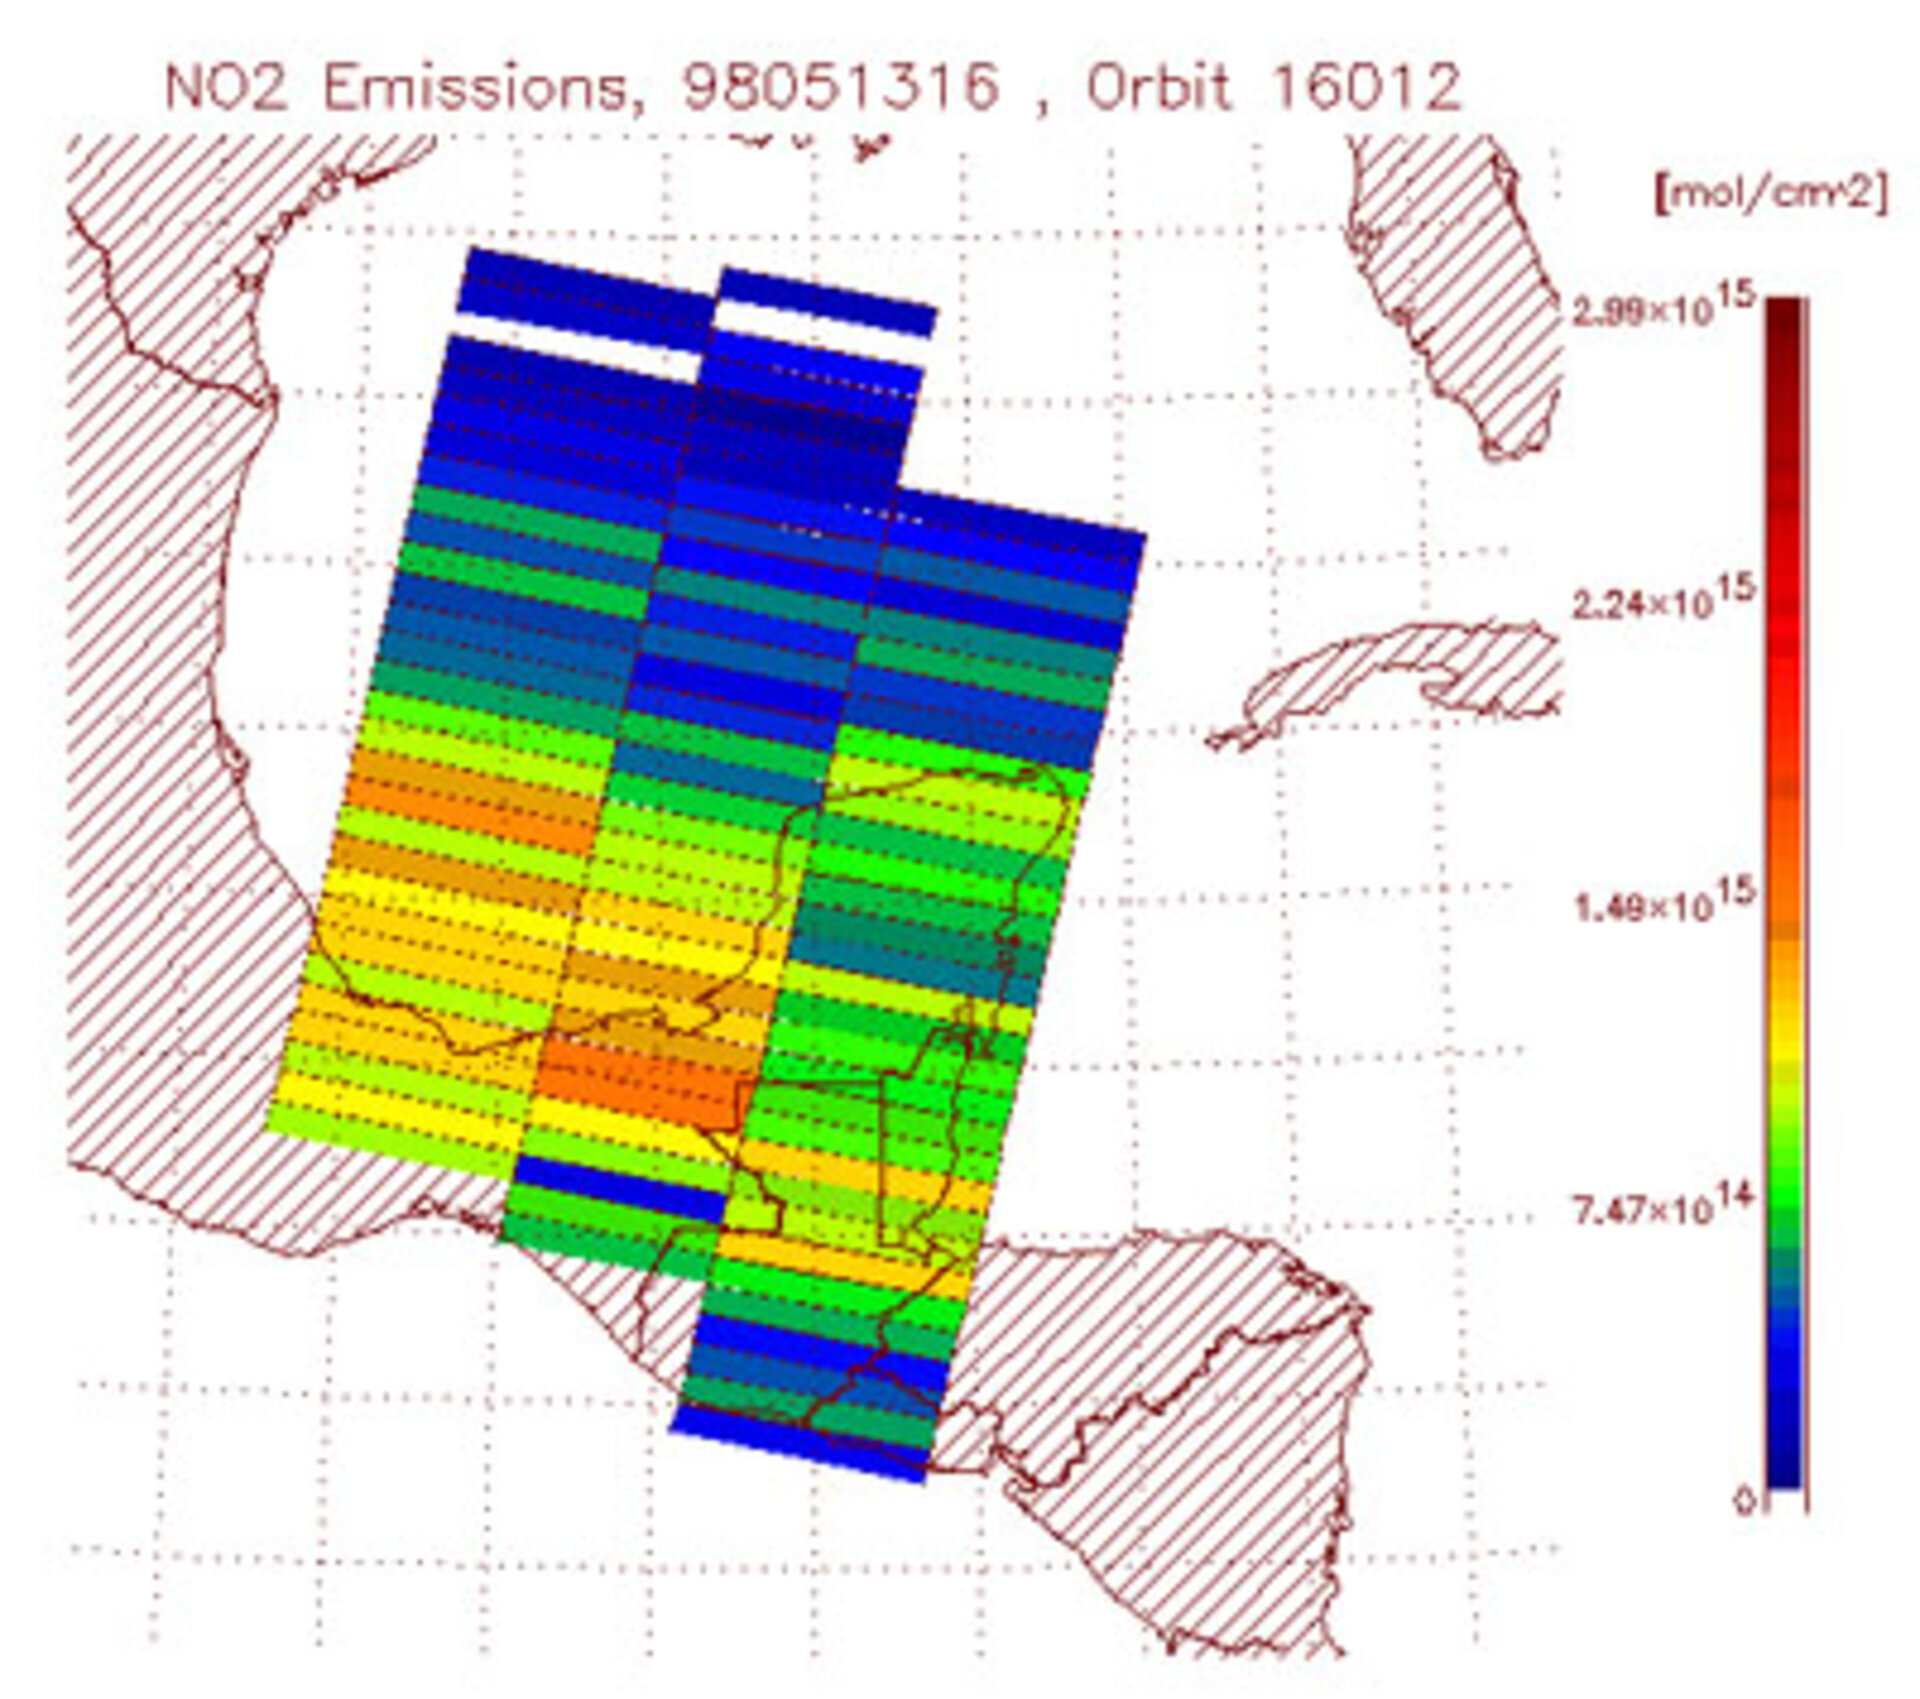 Nitrogen dioxide plume over the Golf of Mexico measured by GOME